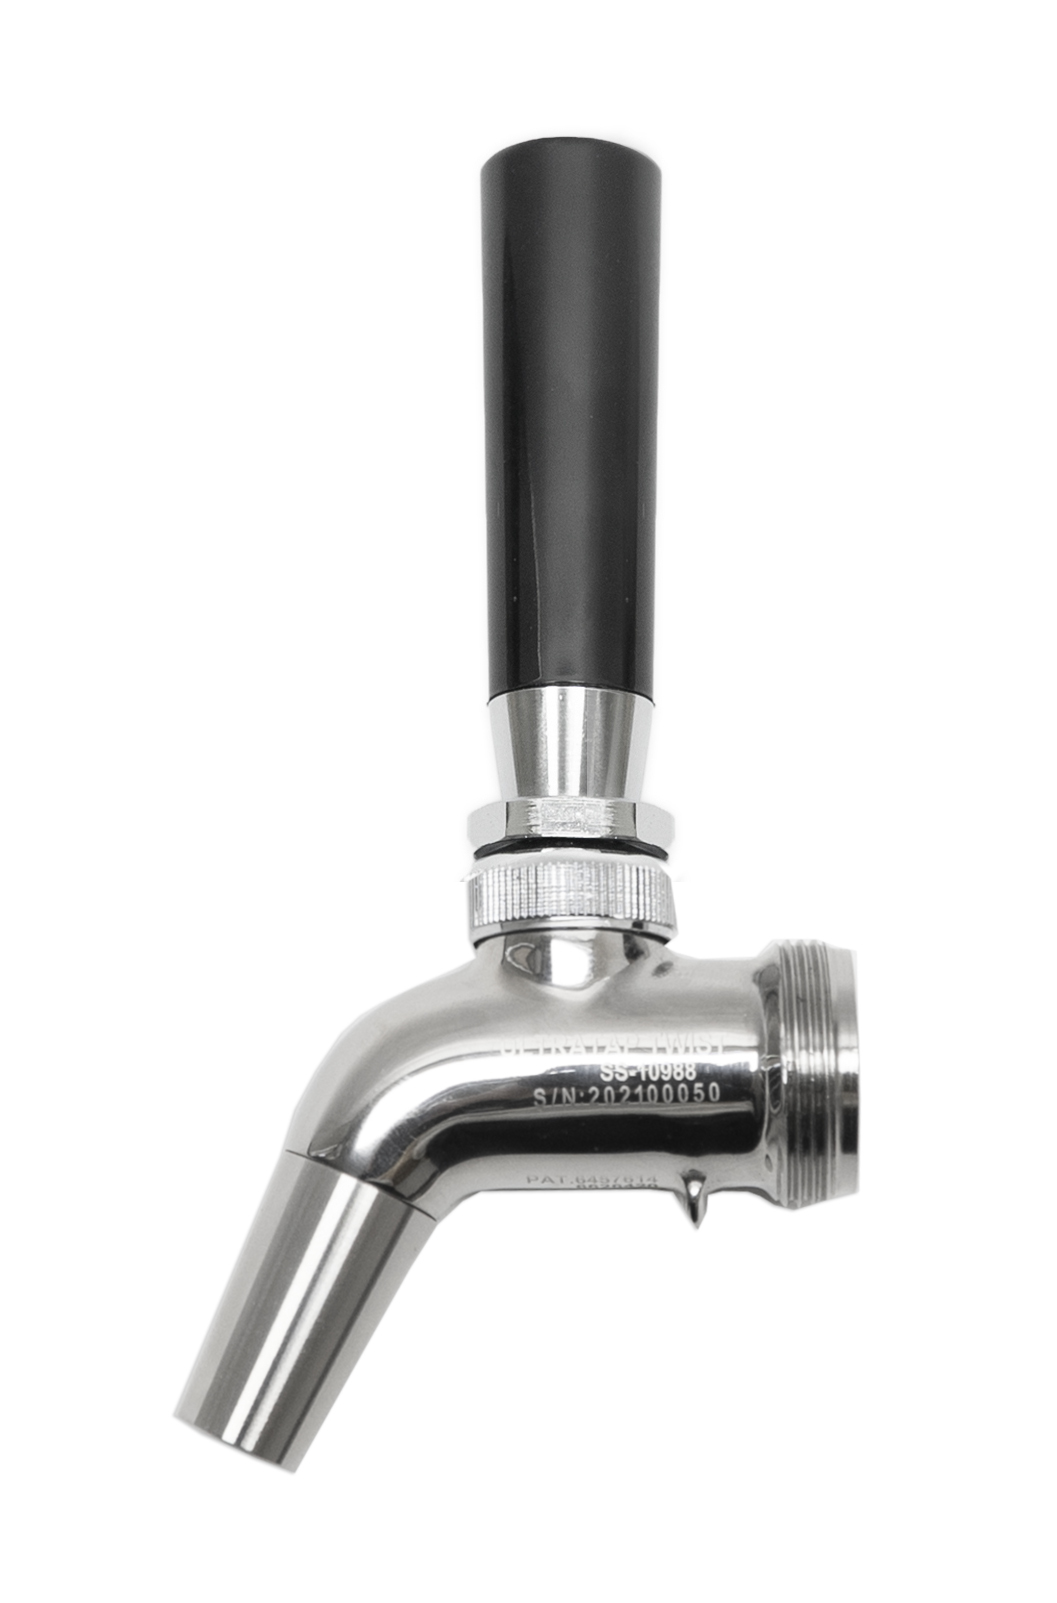 Photo of UltraTap beer tap showing engraved patent and serial number